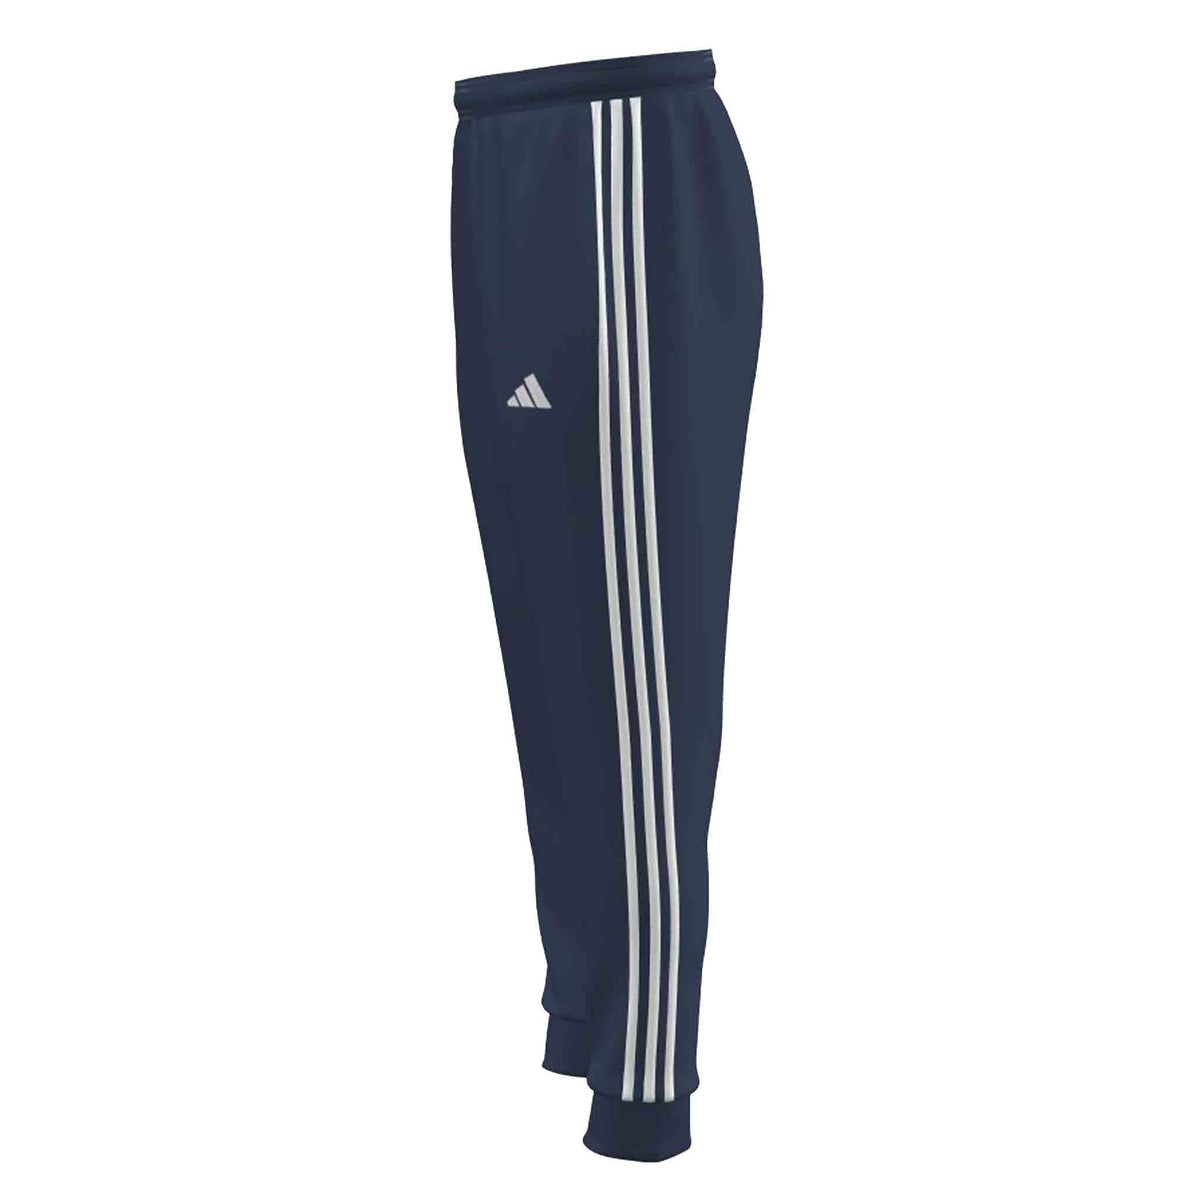 Hampstead and Westminster HC Junior Sweat Pants